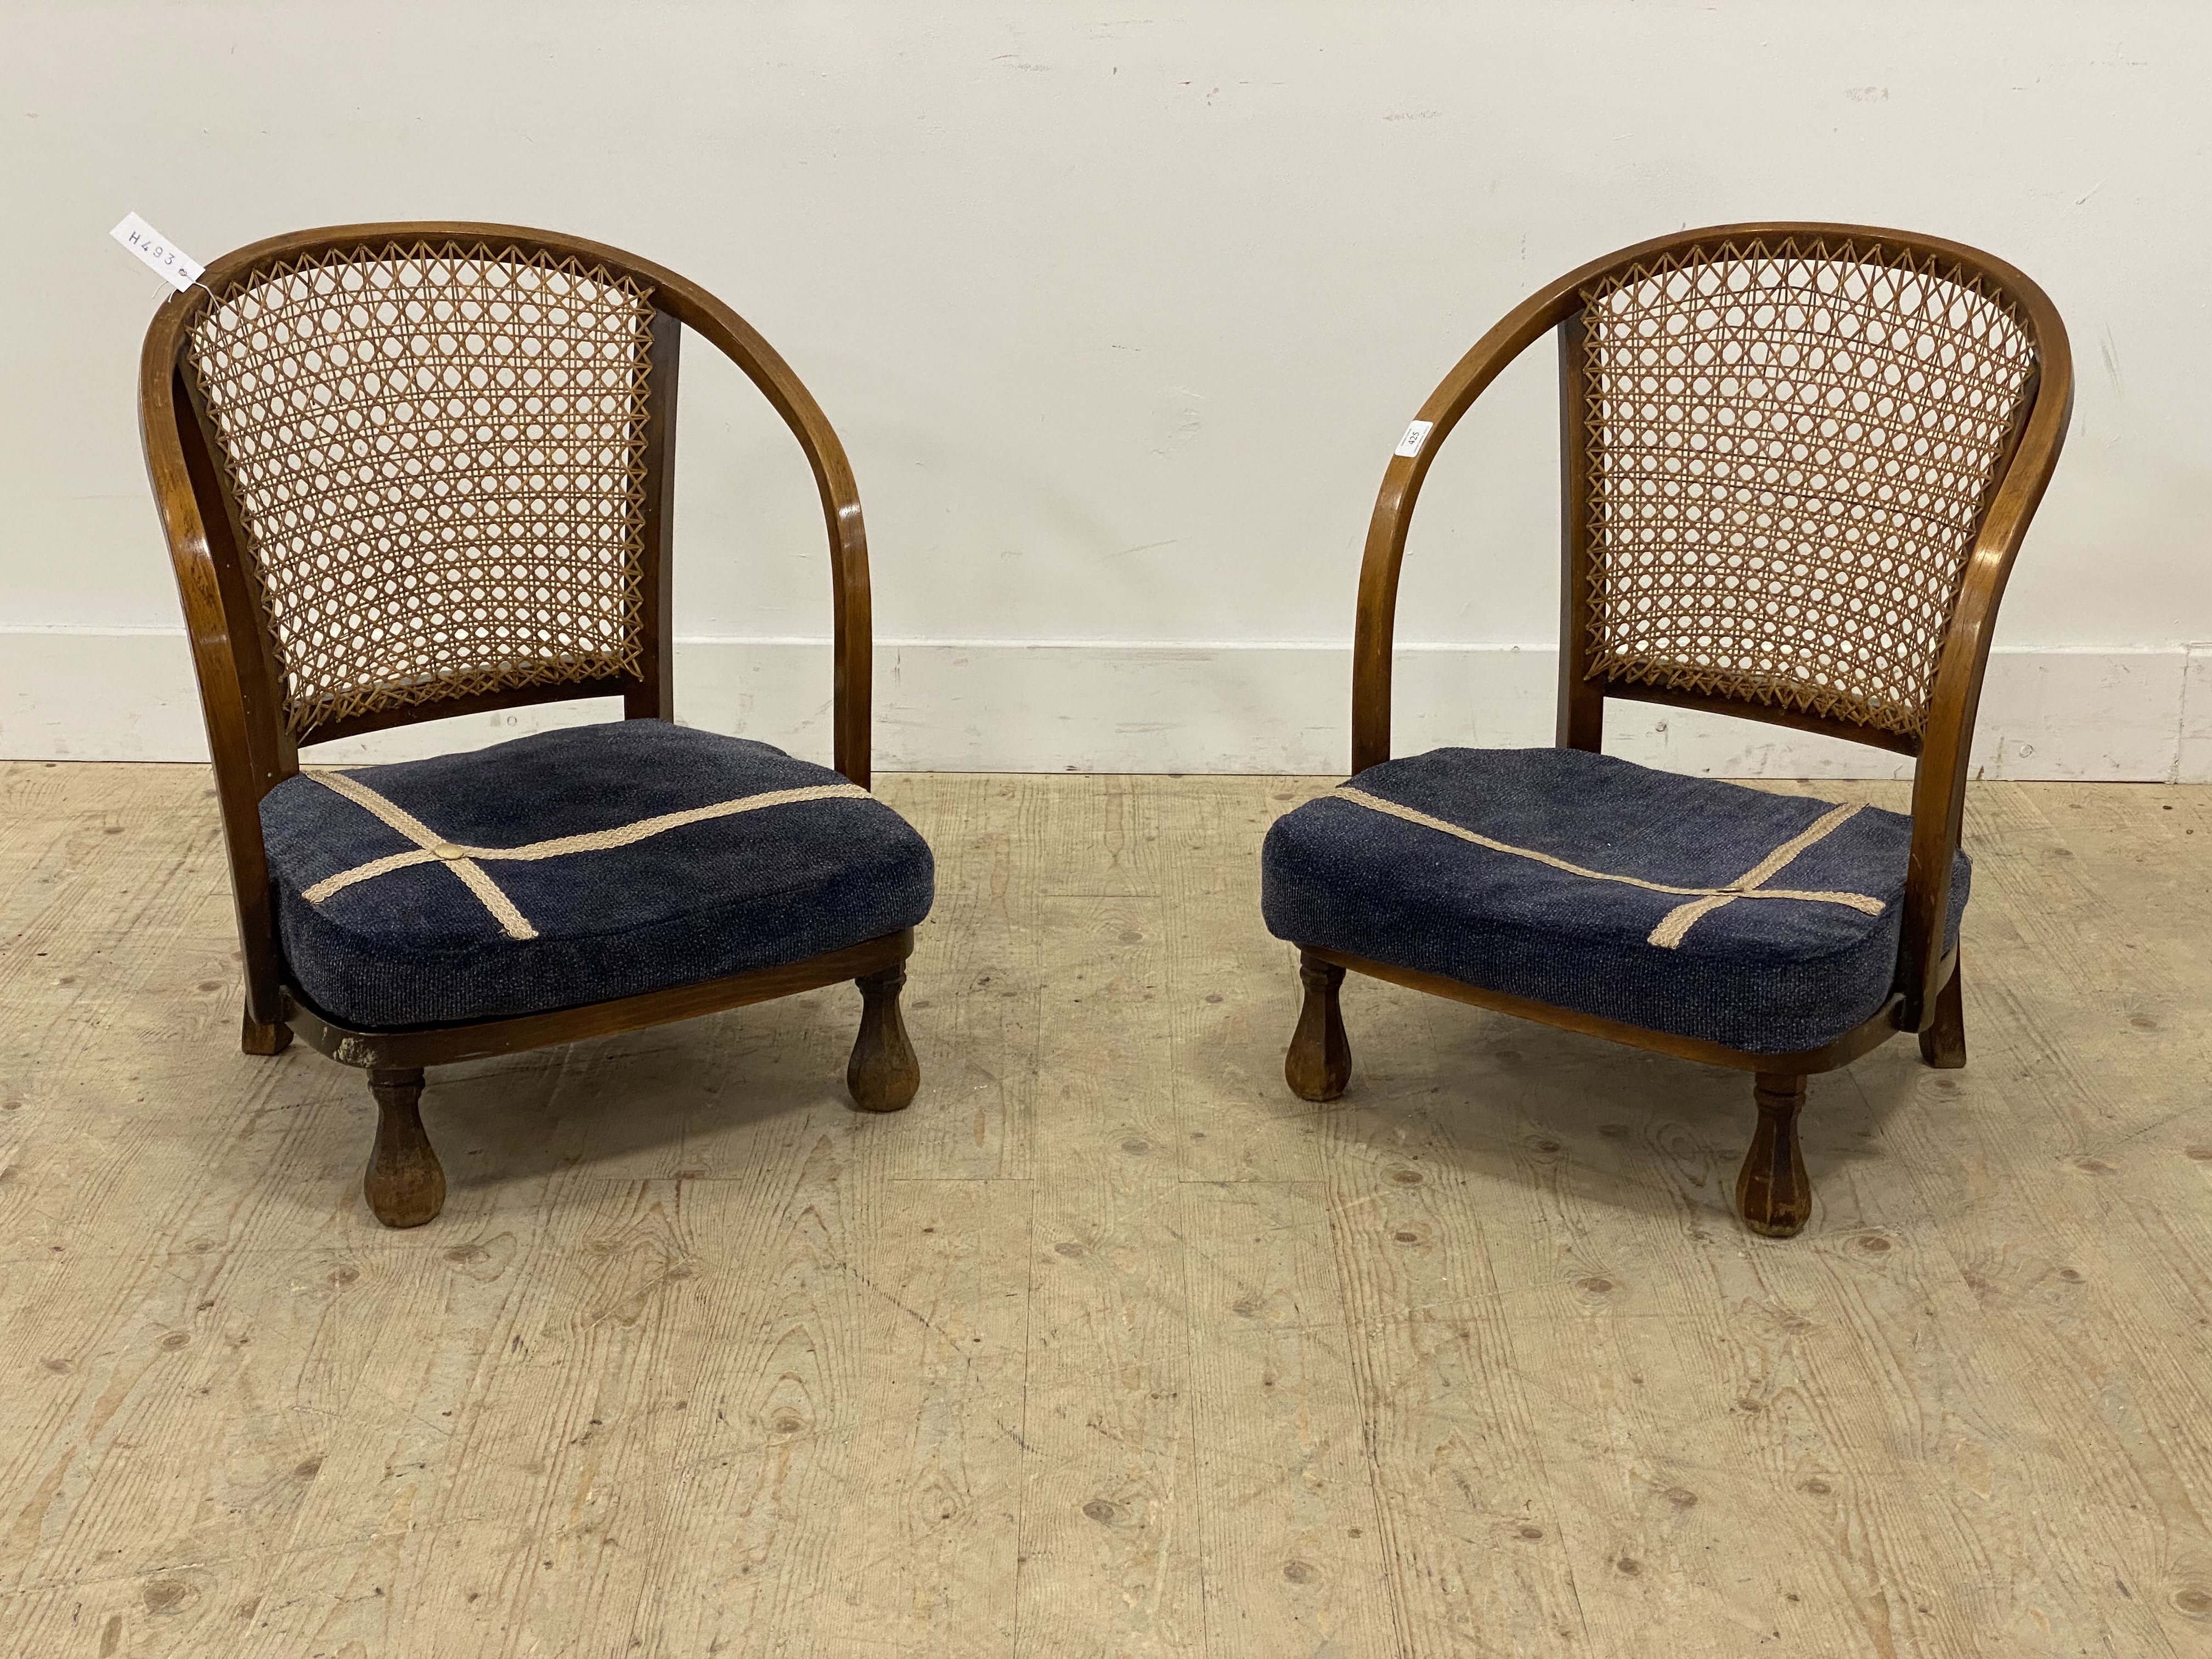 A pair of 1930's bentwood and cane bedroom chairs, with upholstered seat cushions and faceted